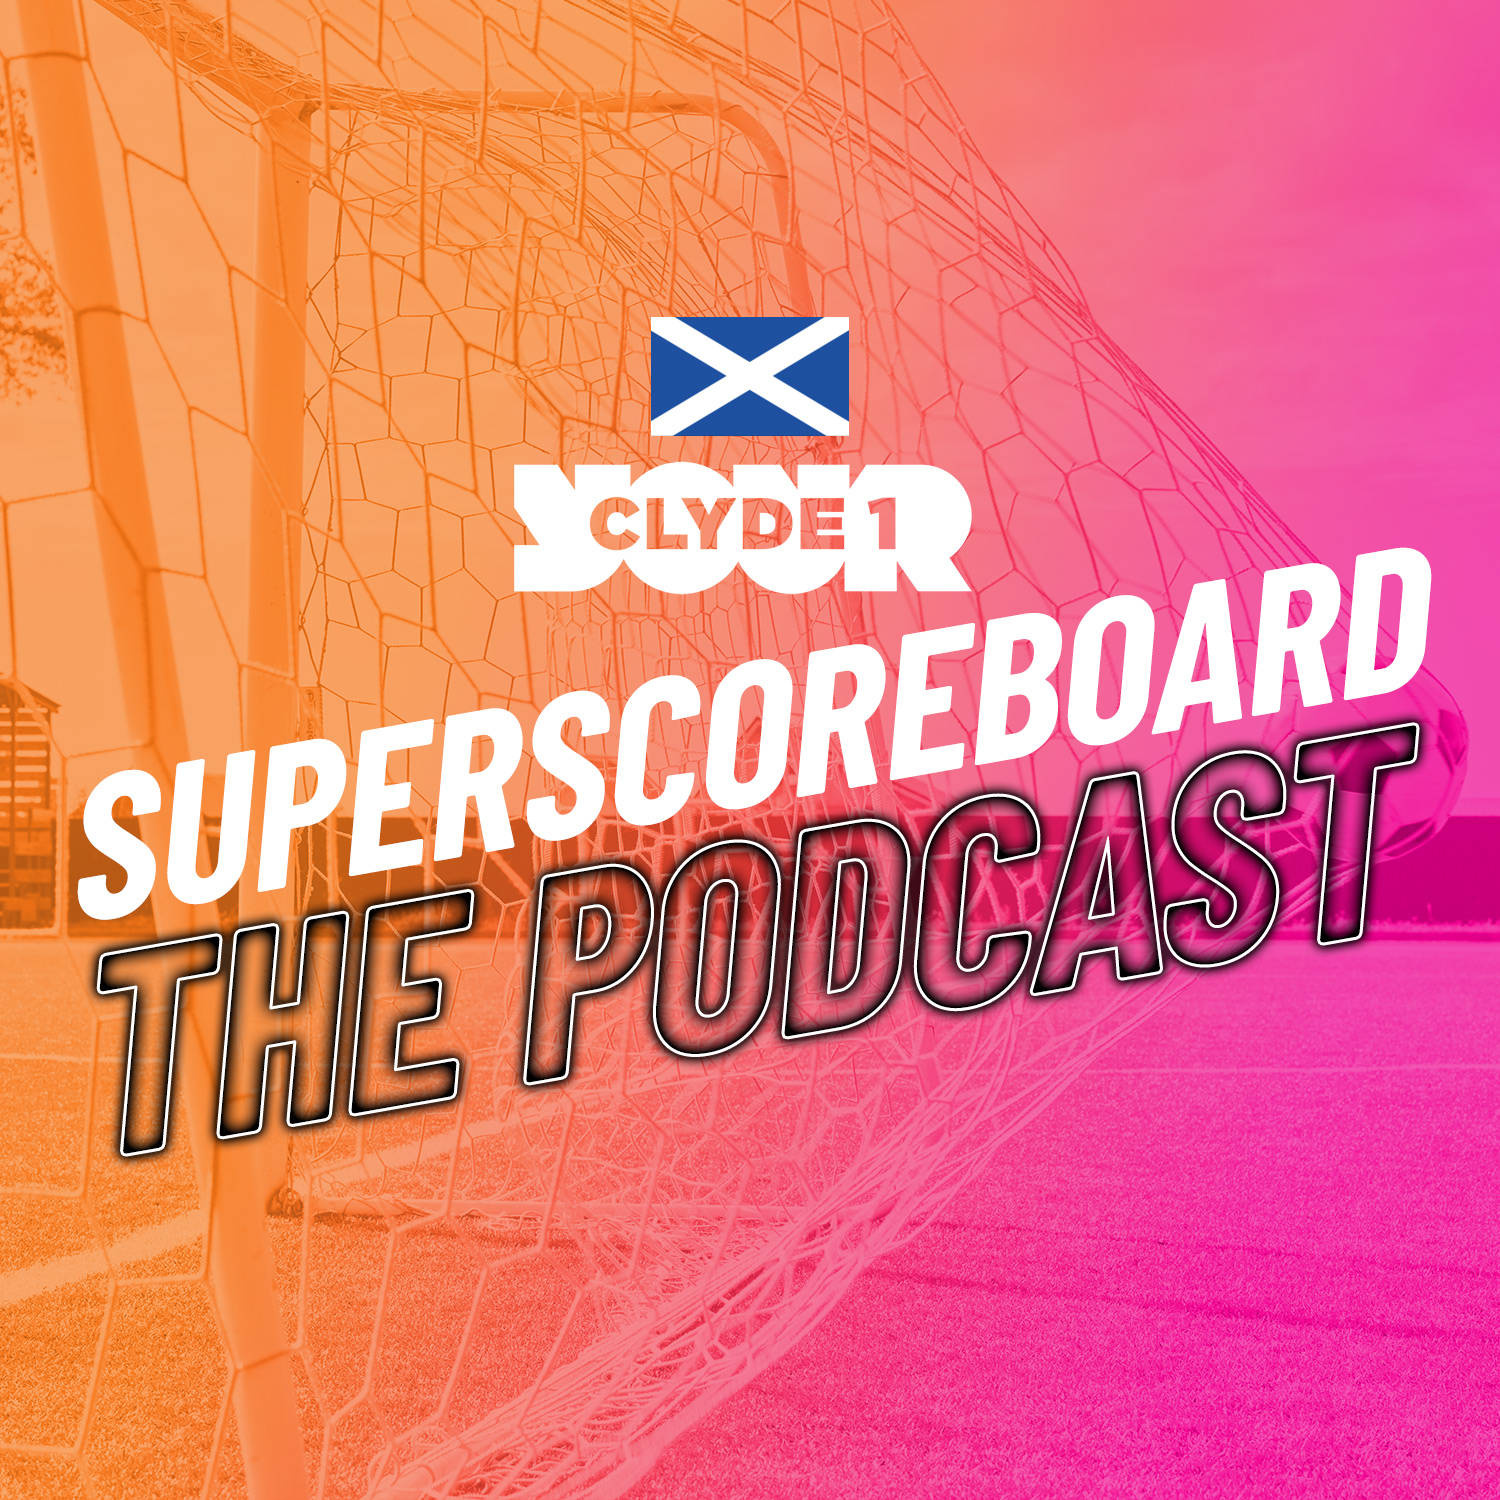 Saturday 3rd February | Clyde 1 Superscoreboard Part 1